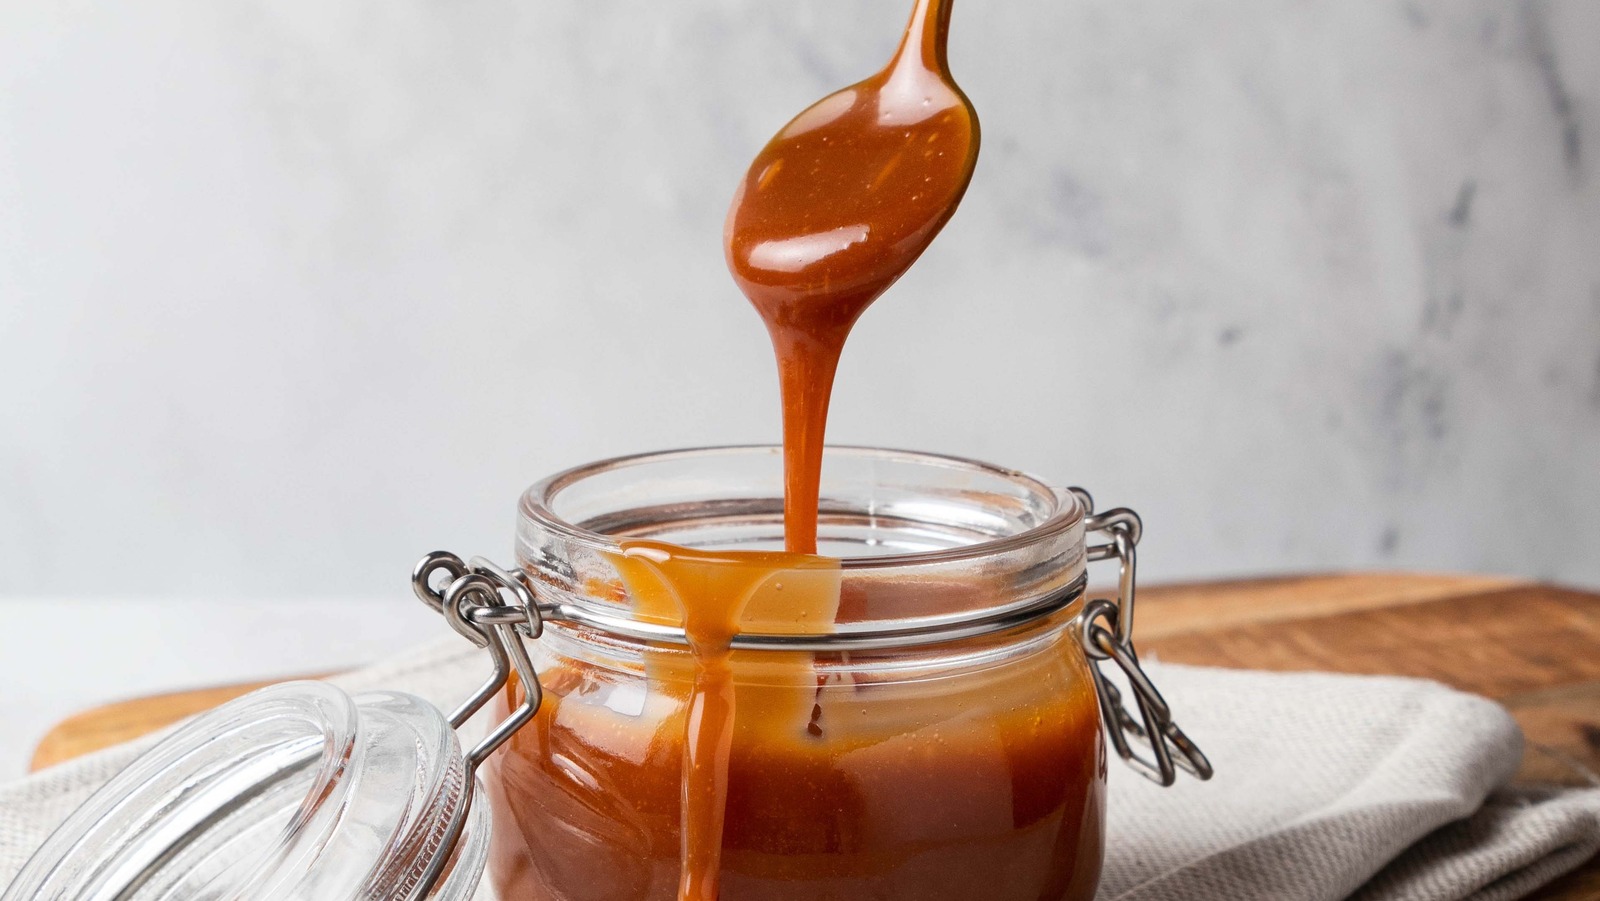 https://www.thedailymeal.com/img/gallery/14-common-mistakes-everyone-makes-with-homemade-caramel/l-intro-1697144200.jpg